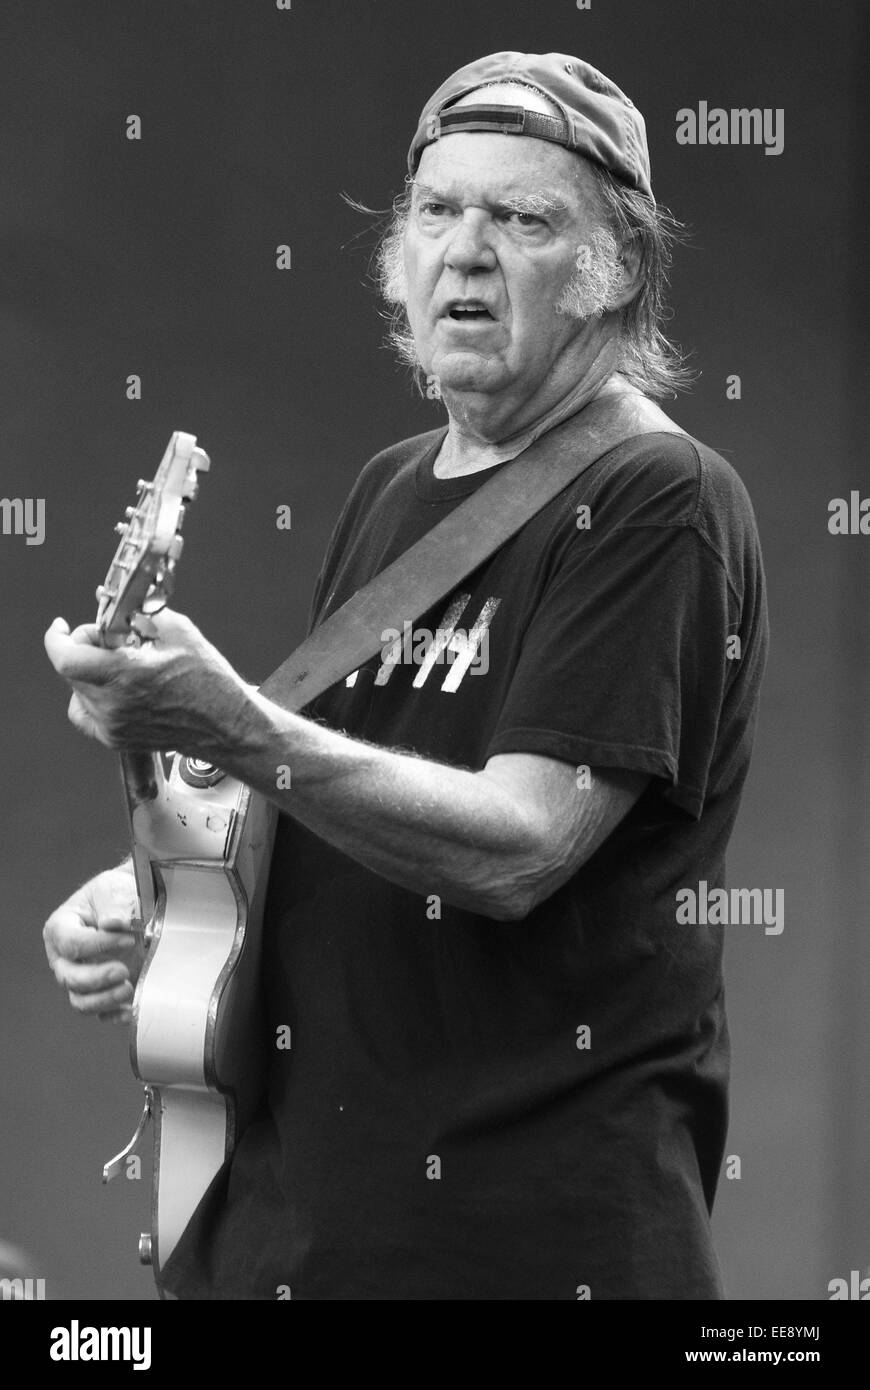 Neil Young and Crazy Horse headline British Summertime at Hyde Park, London  Featuring: Neil Young Where: London, United Kingdom When: 12 Jul 2014 Stock Photo